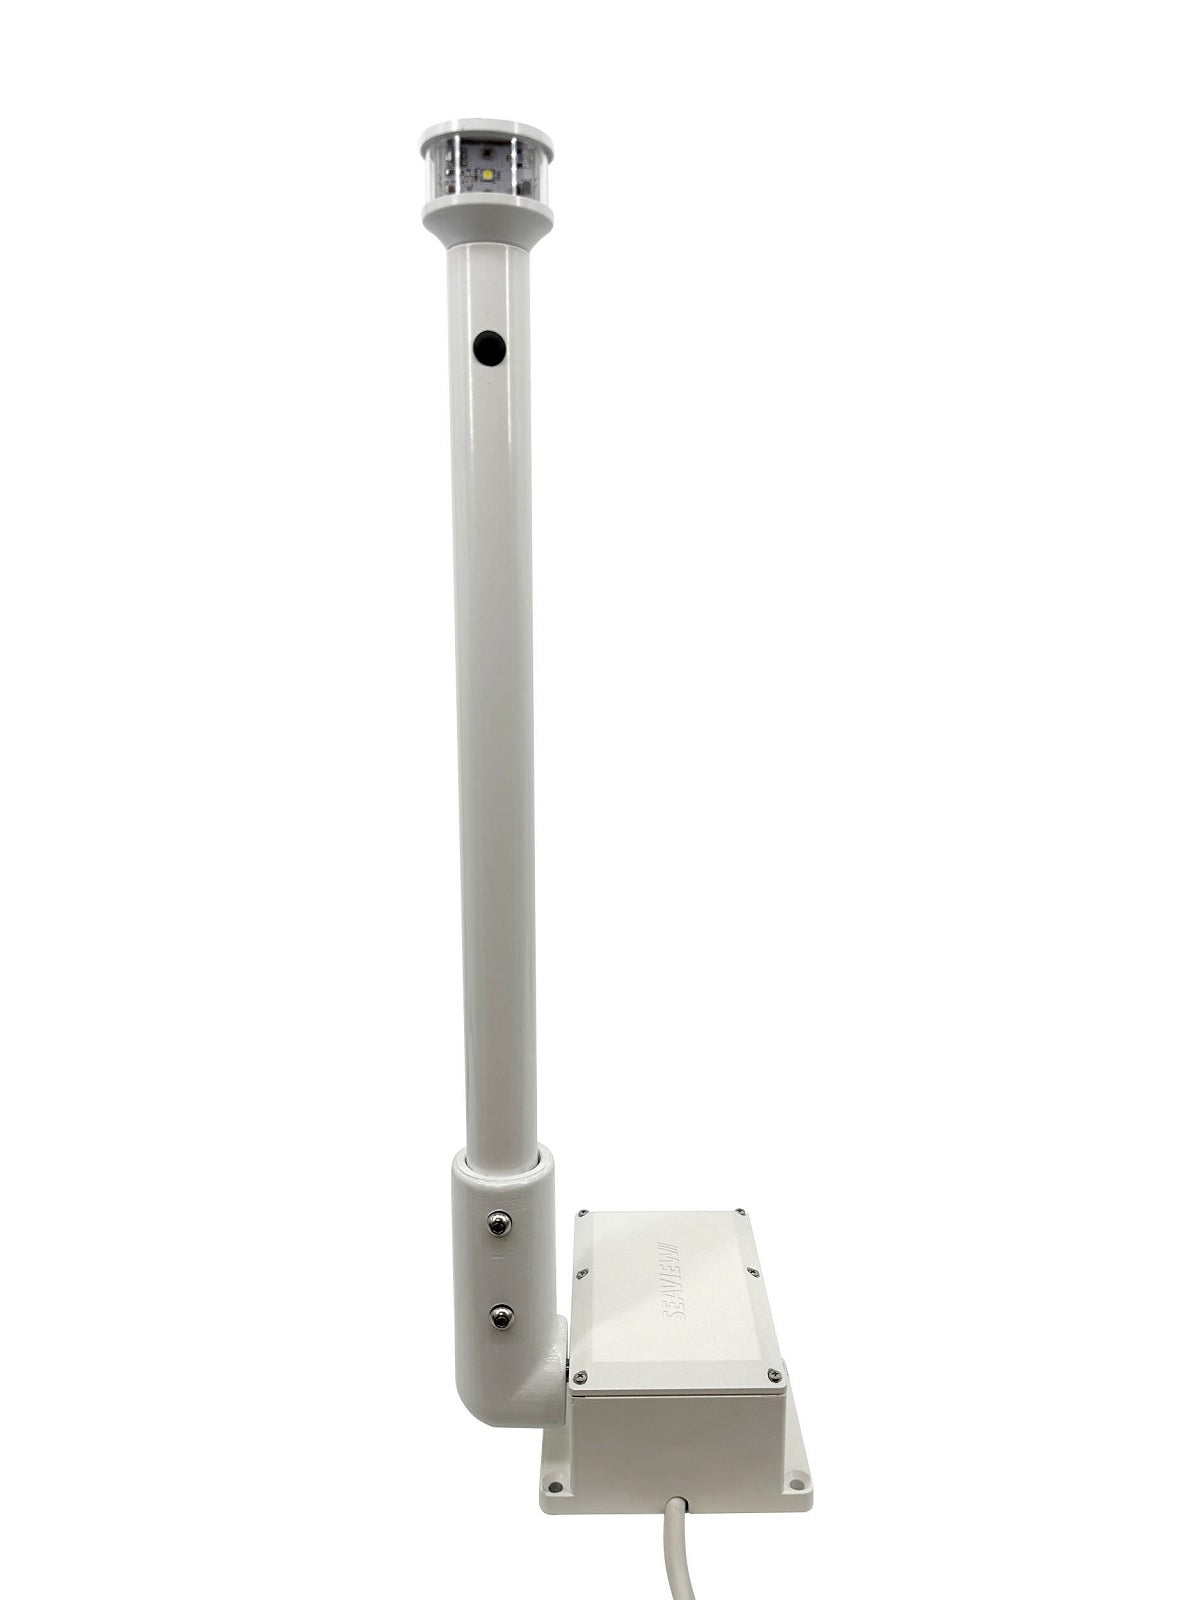 Seaview 36" Light Post Electrically Folding Requires Light Bar Top